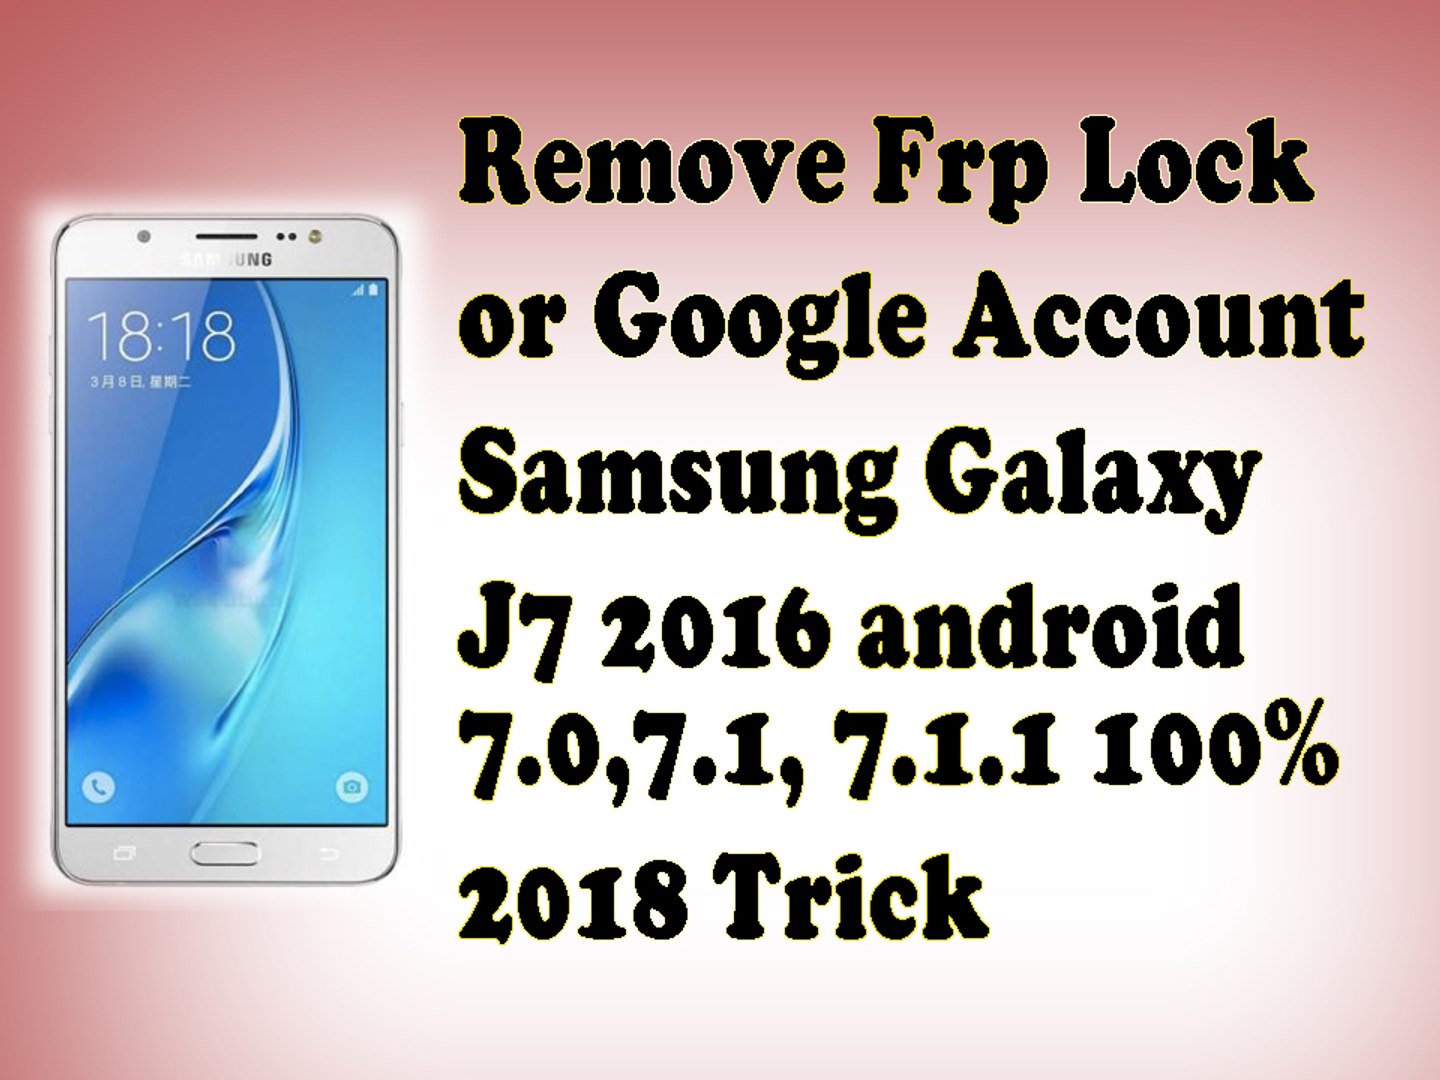 Frp lock removal software samsung